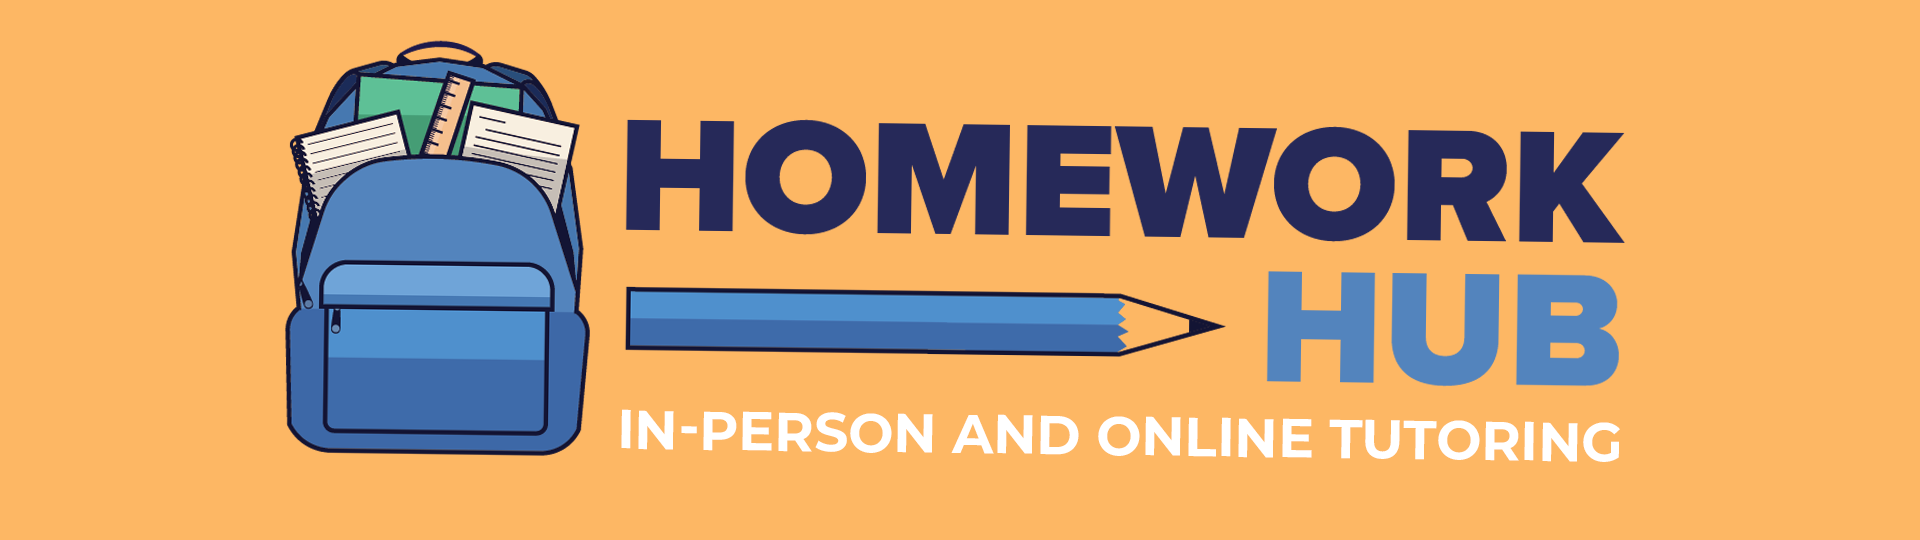 Homework Hub - In person and online tutoring